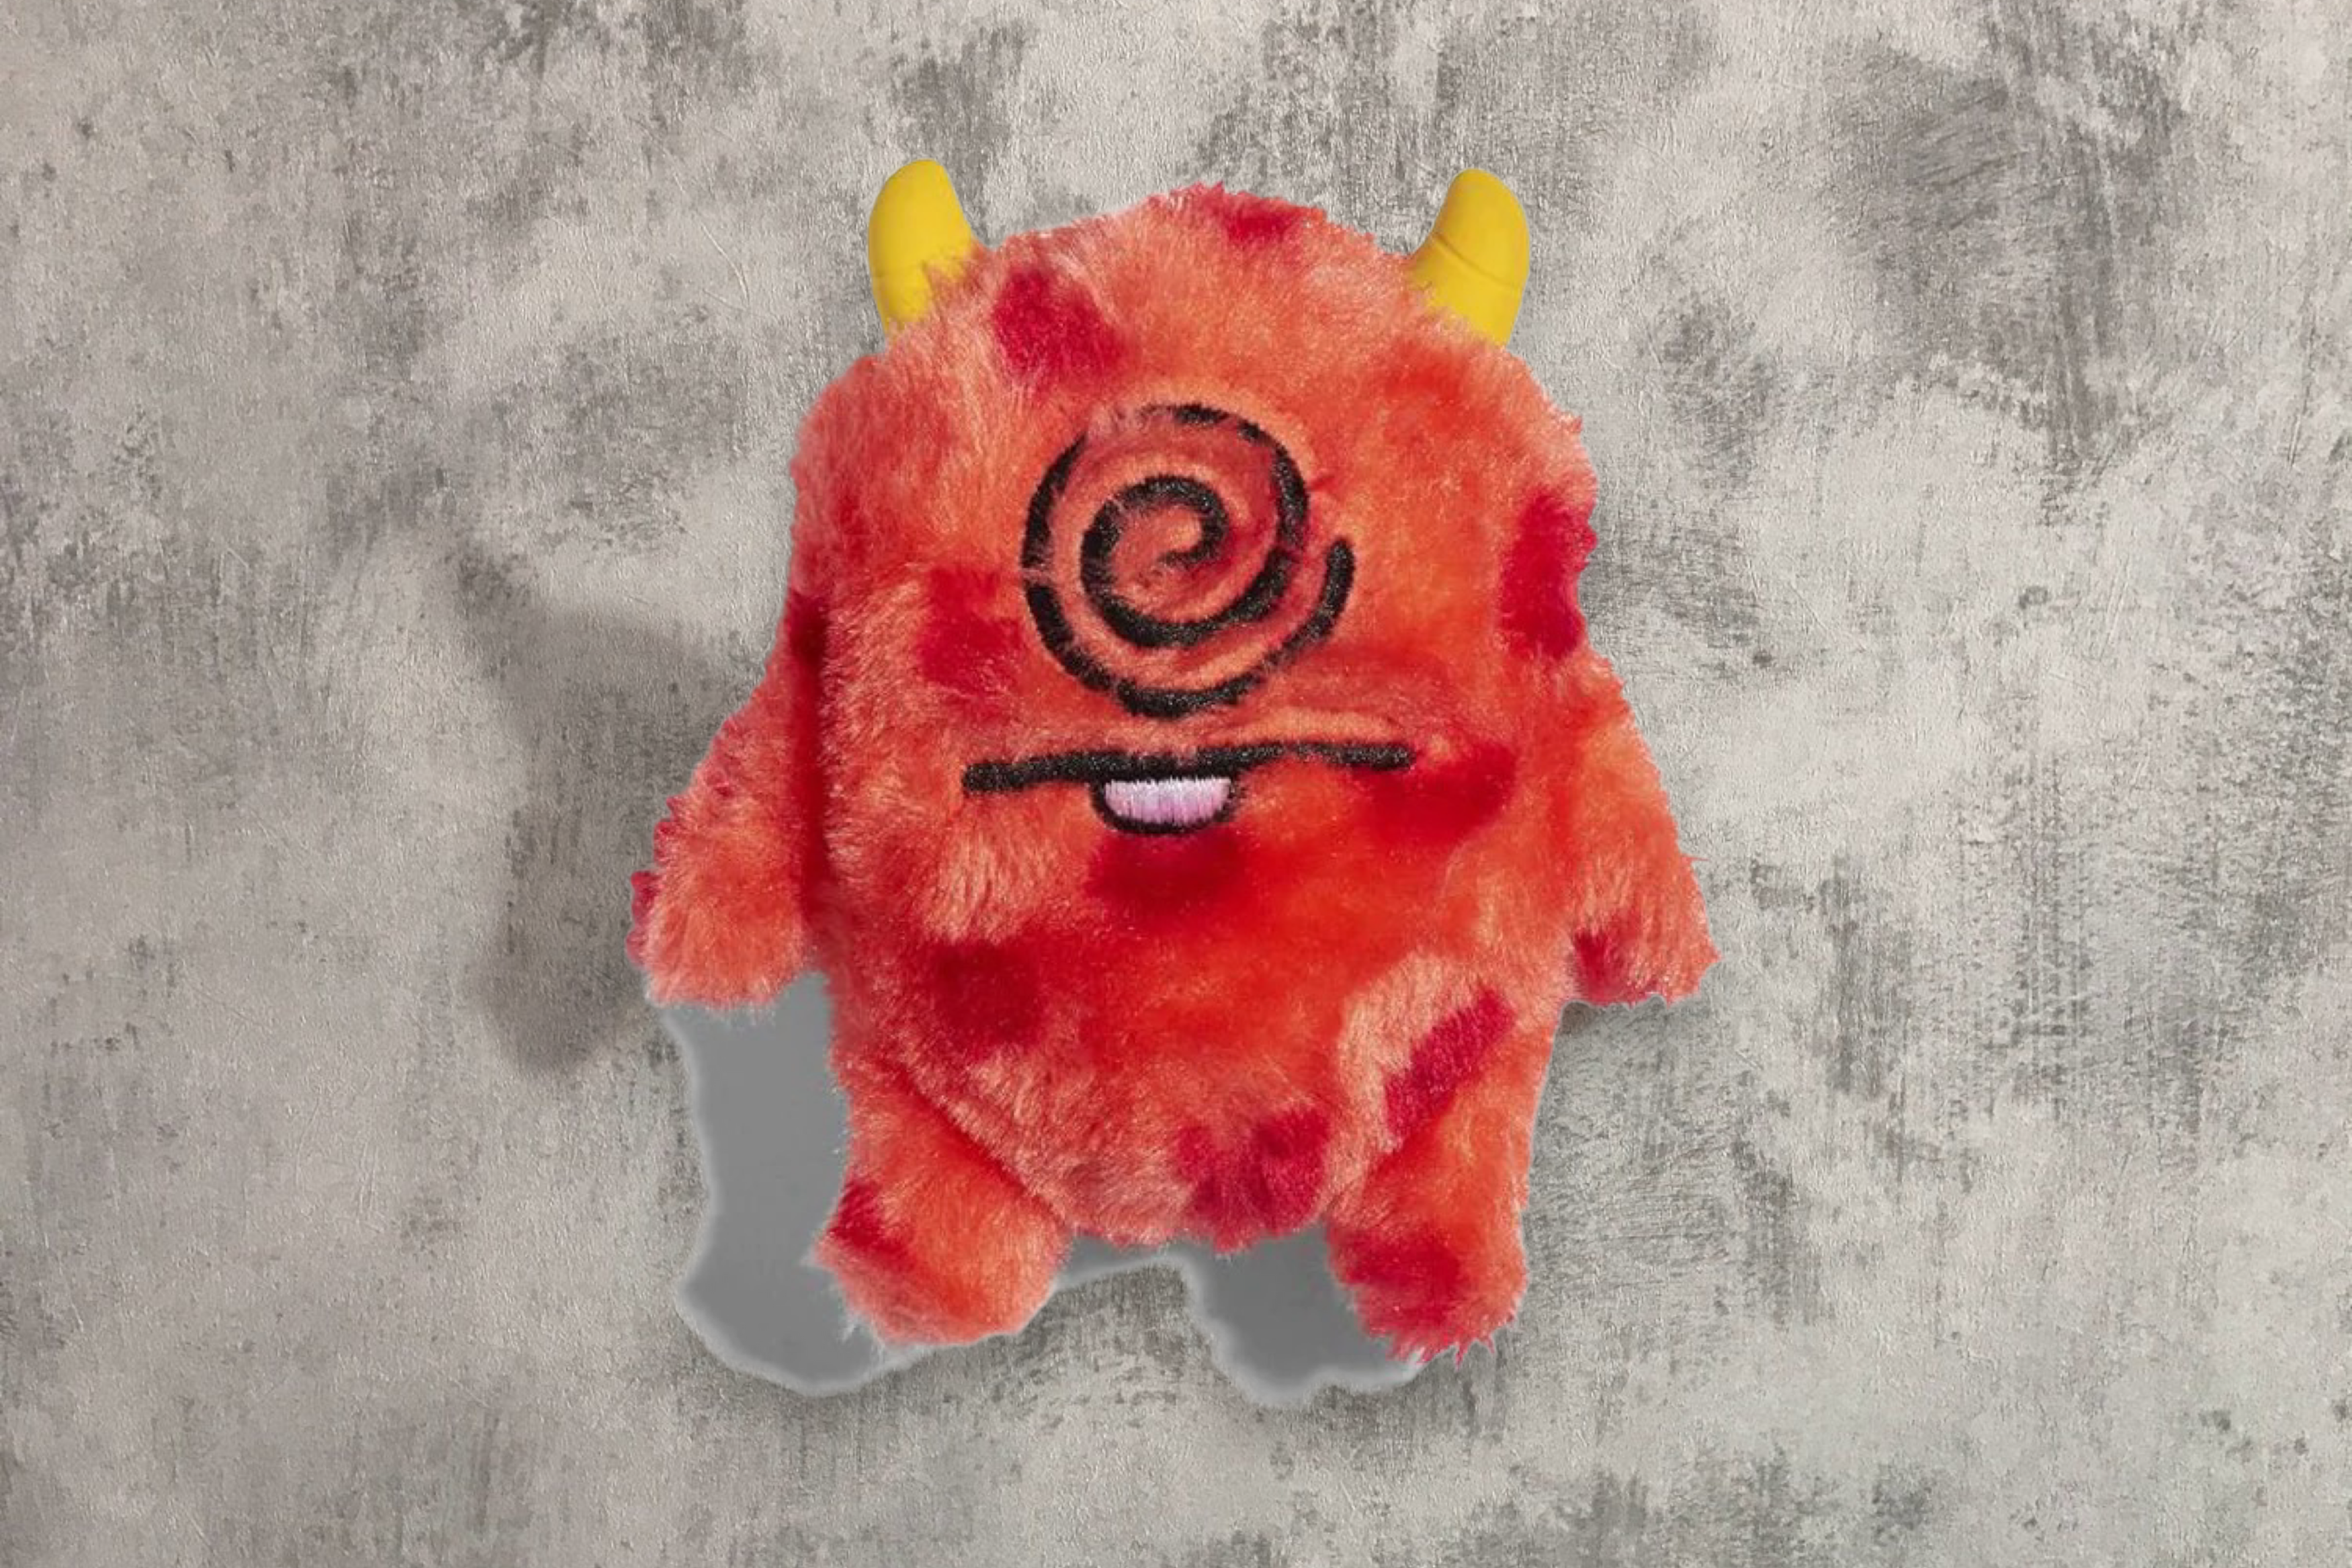 A Cyclops Pet Toy by Zee.Dog plush toy with a whimsical red and orange fur design, featuring a Cyclops swirled eye and a playful expression, complete with little yellow horns, set against a textured grey background.